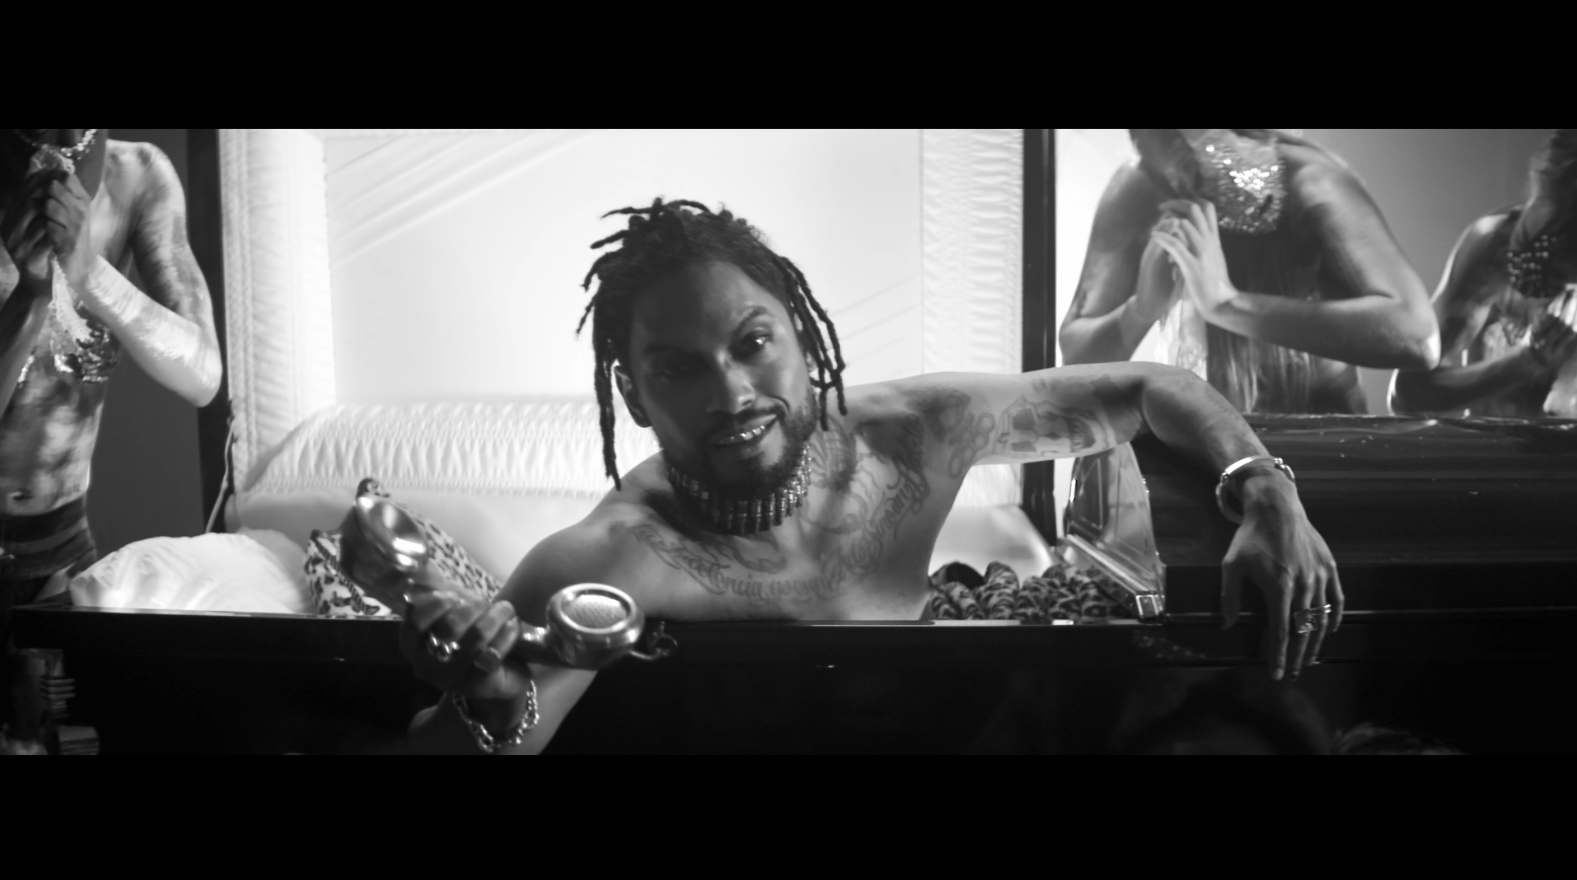 Miguel Releases "Funeral" Video + Announces Return of "Art Dealer Chic" EP Series